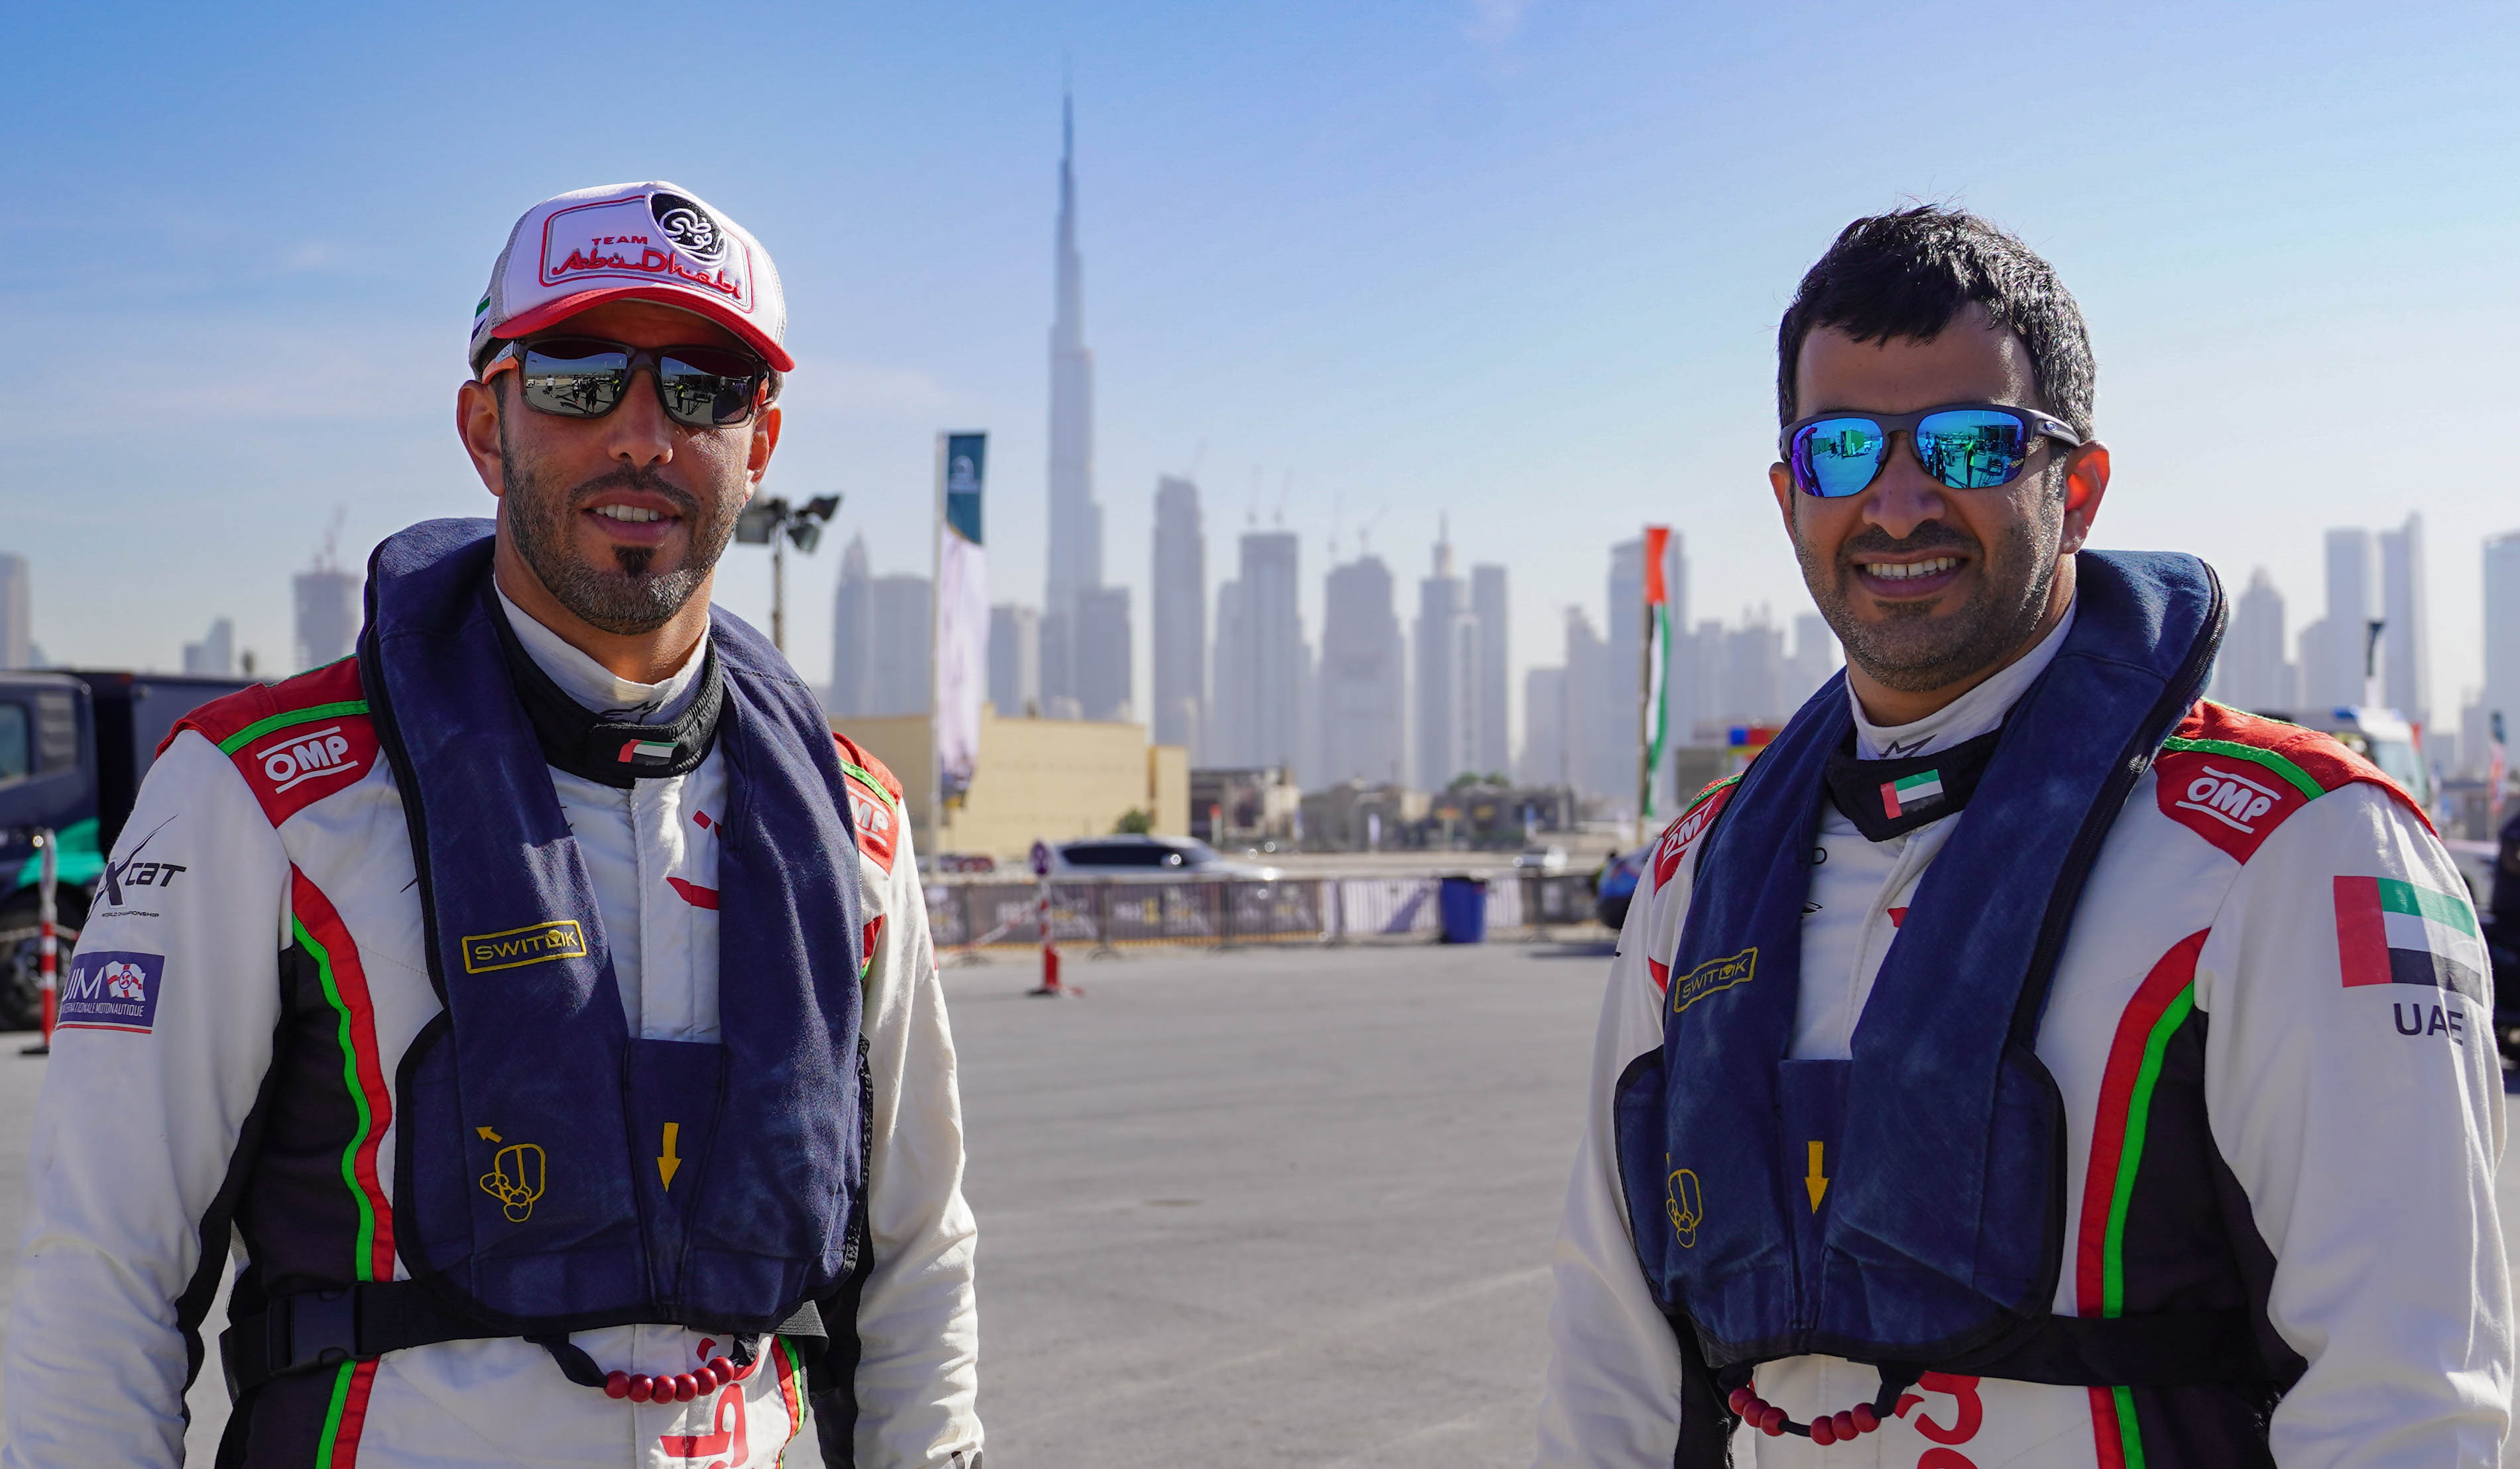 TEAM ABU DHABI DUO GRAB POLE POSITION TO  BOOST XCAT TITLE HOPES IN DUBAI